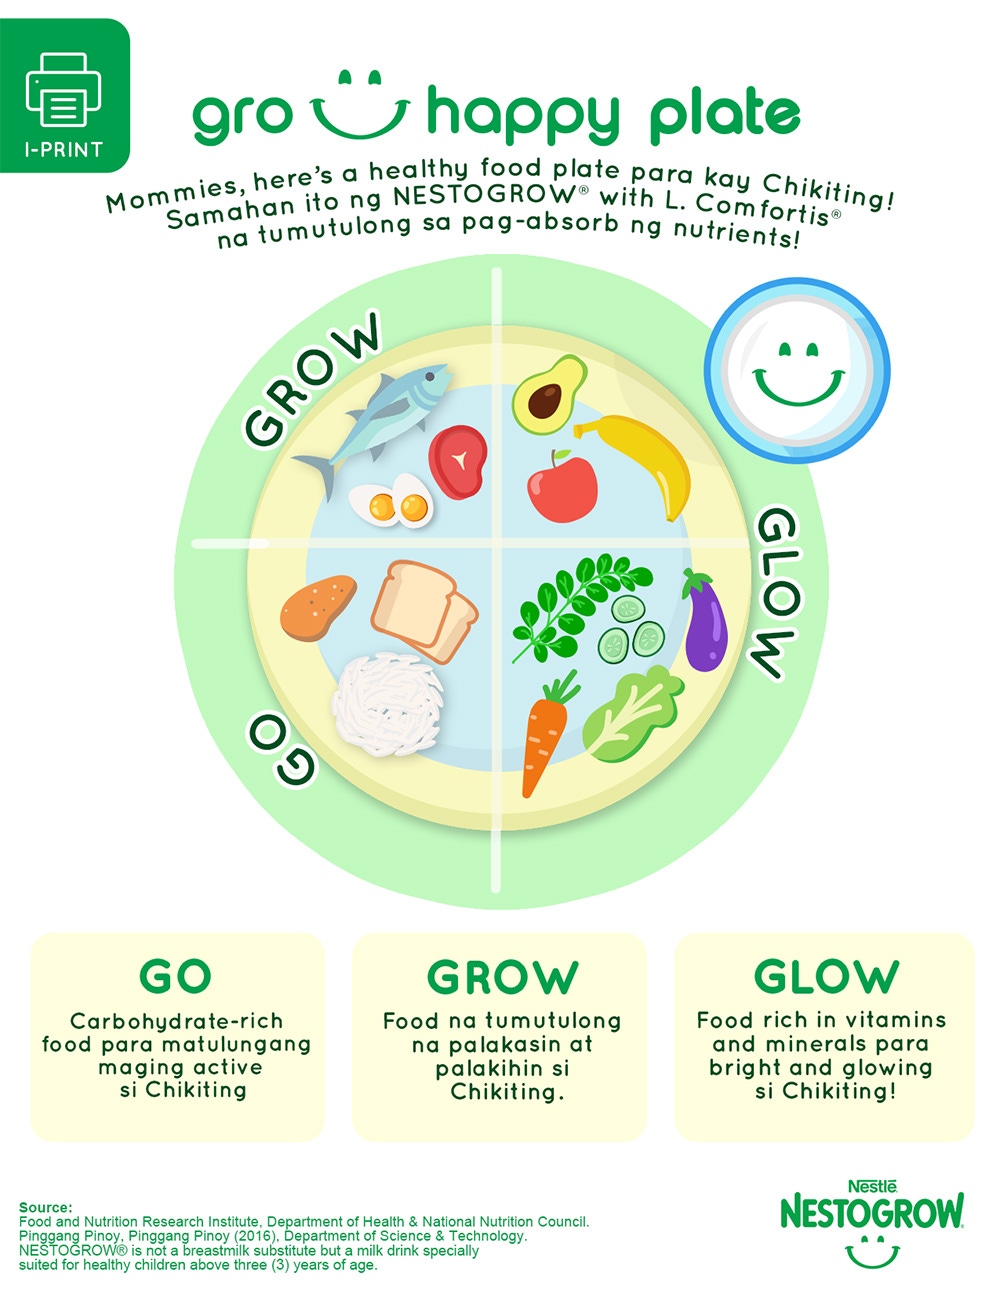 growhappy-plate